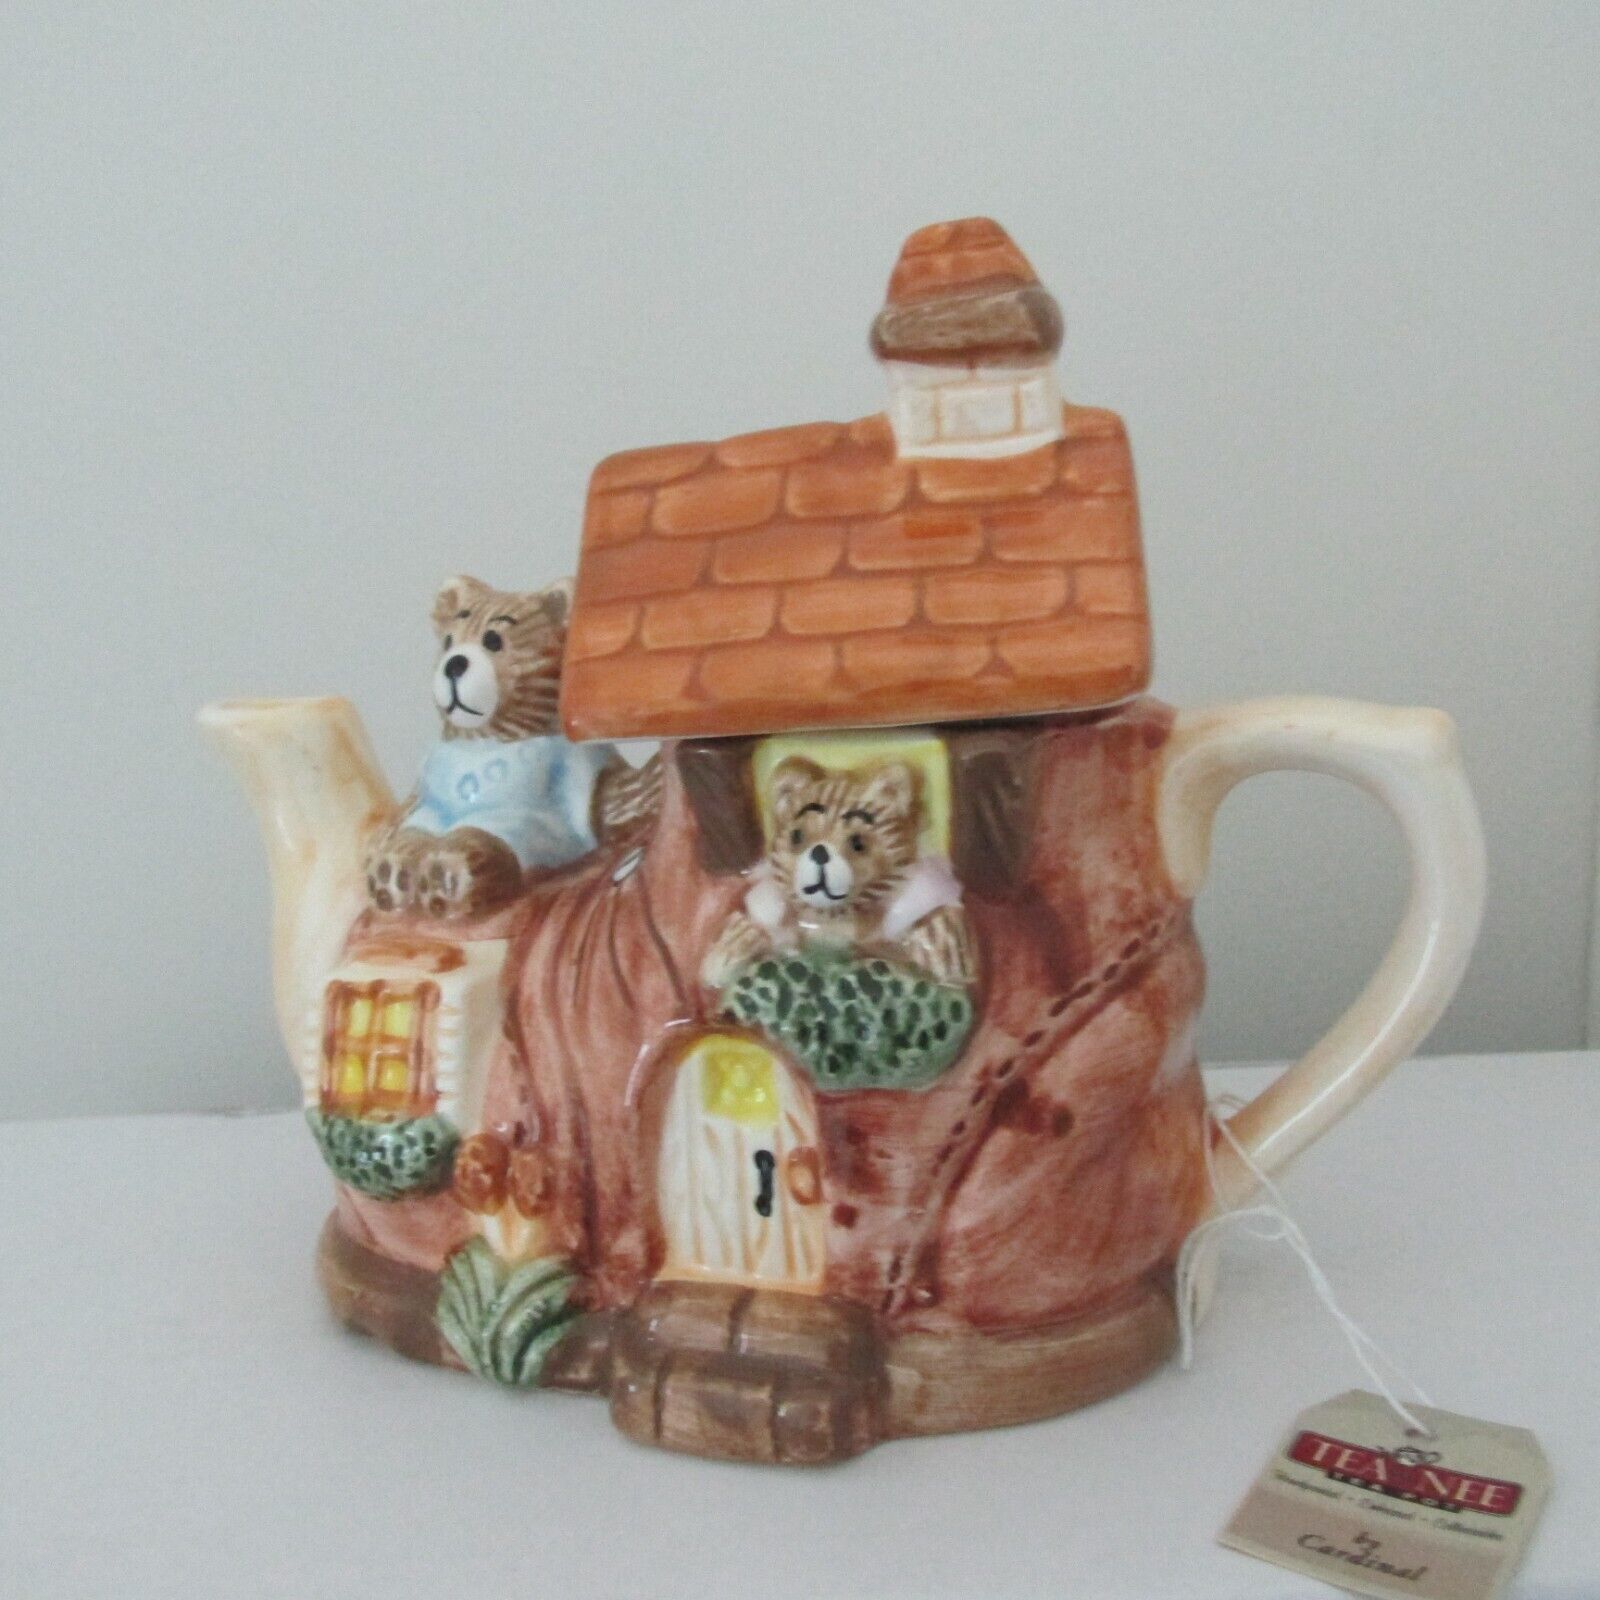 Tea Nee Two Little Bears Shoe House Collectible Teapot By Cardinal